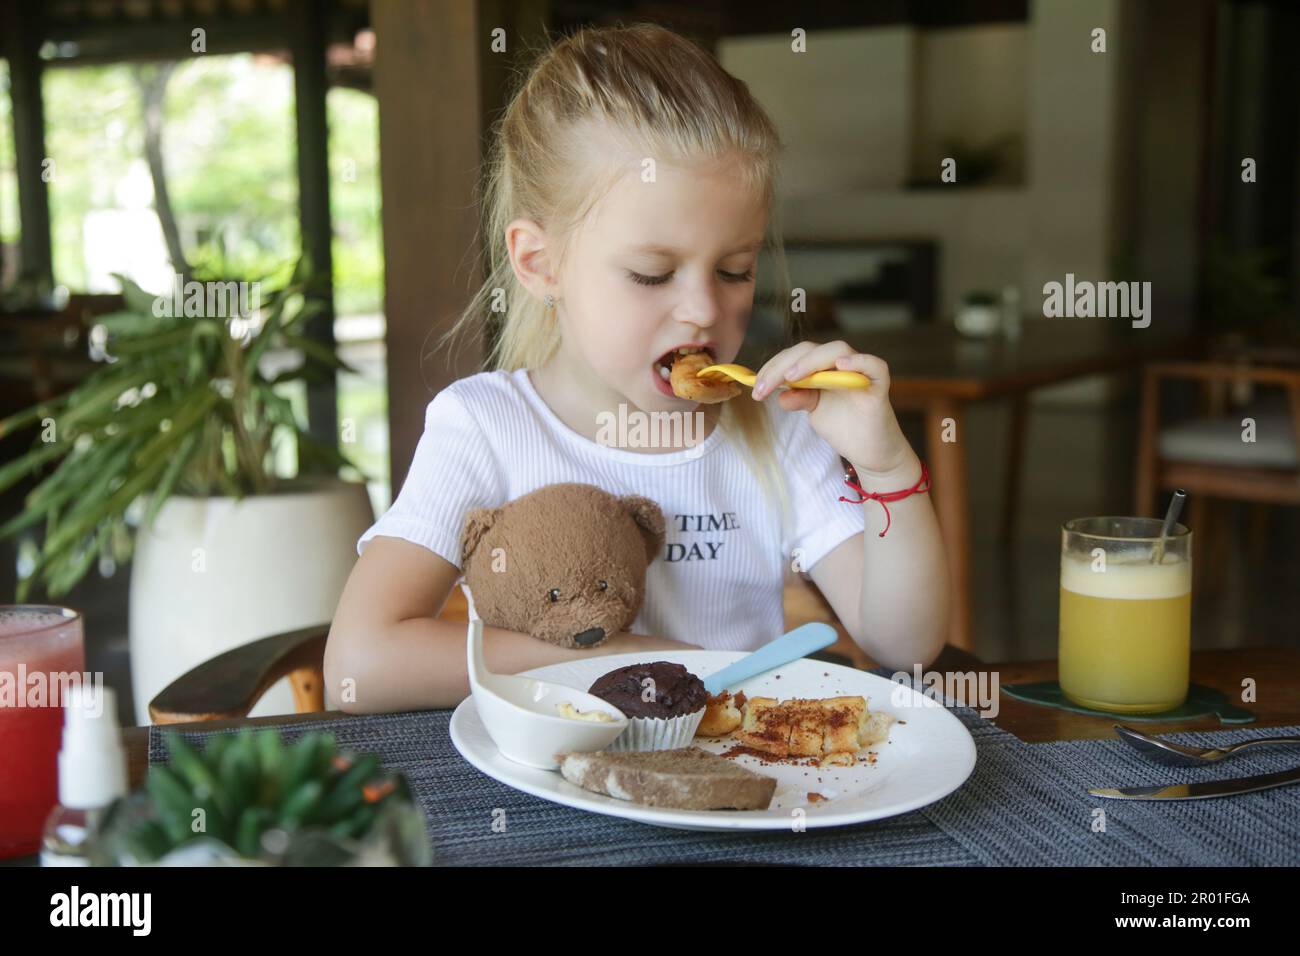 Cute 5 years old girl having kids meal at the restaurant Cute 5 years old girl having kids meal at the restaurant Stock Photo